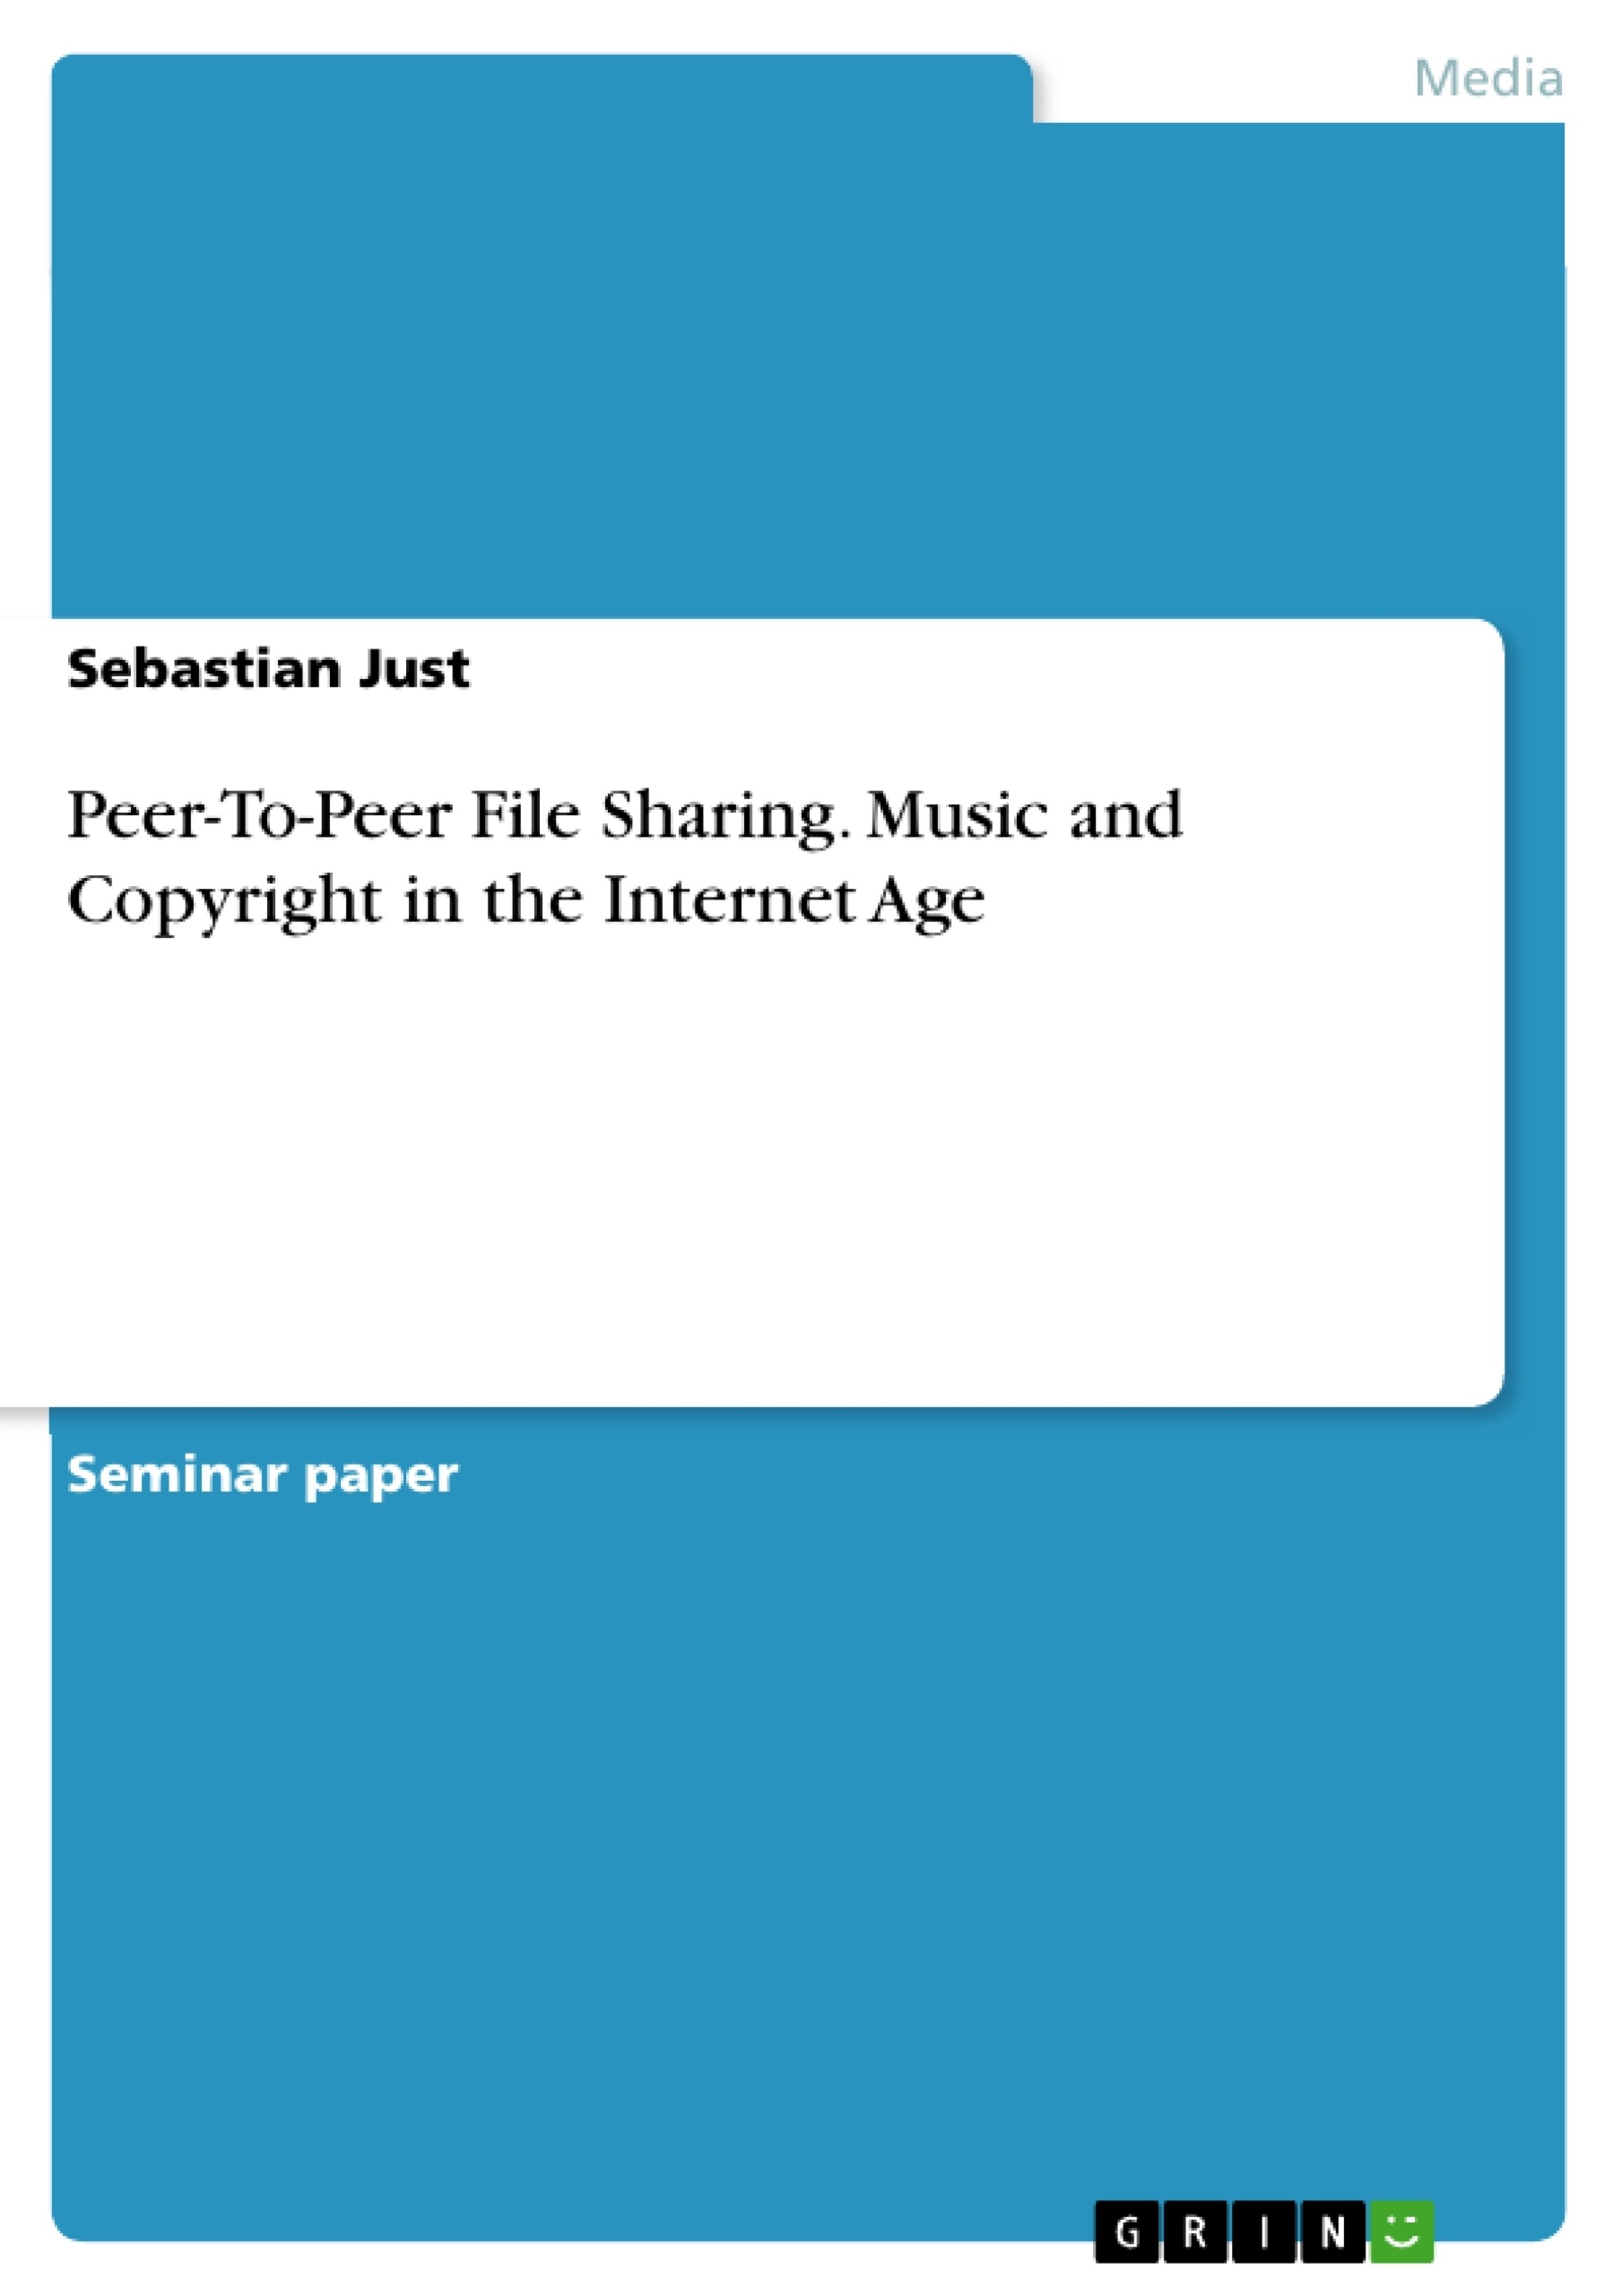 Title: Peer-To-Peer File Sharing. Music and Copyright in the Internet Age